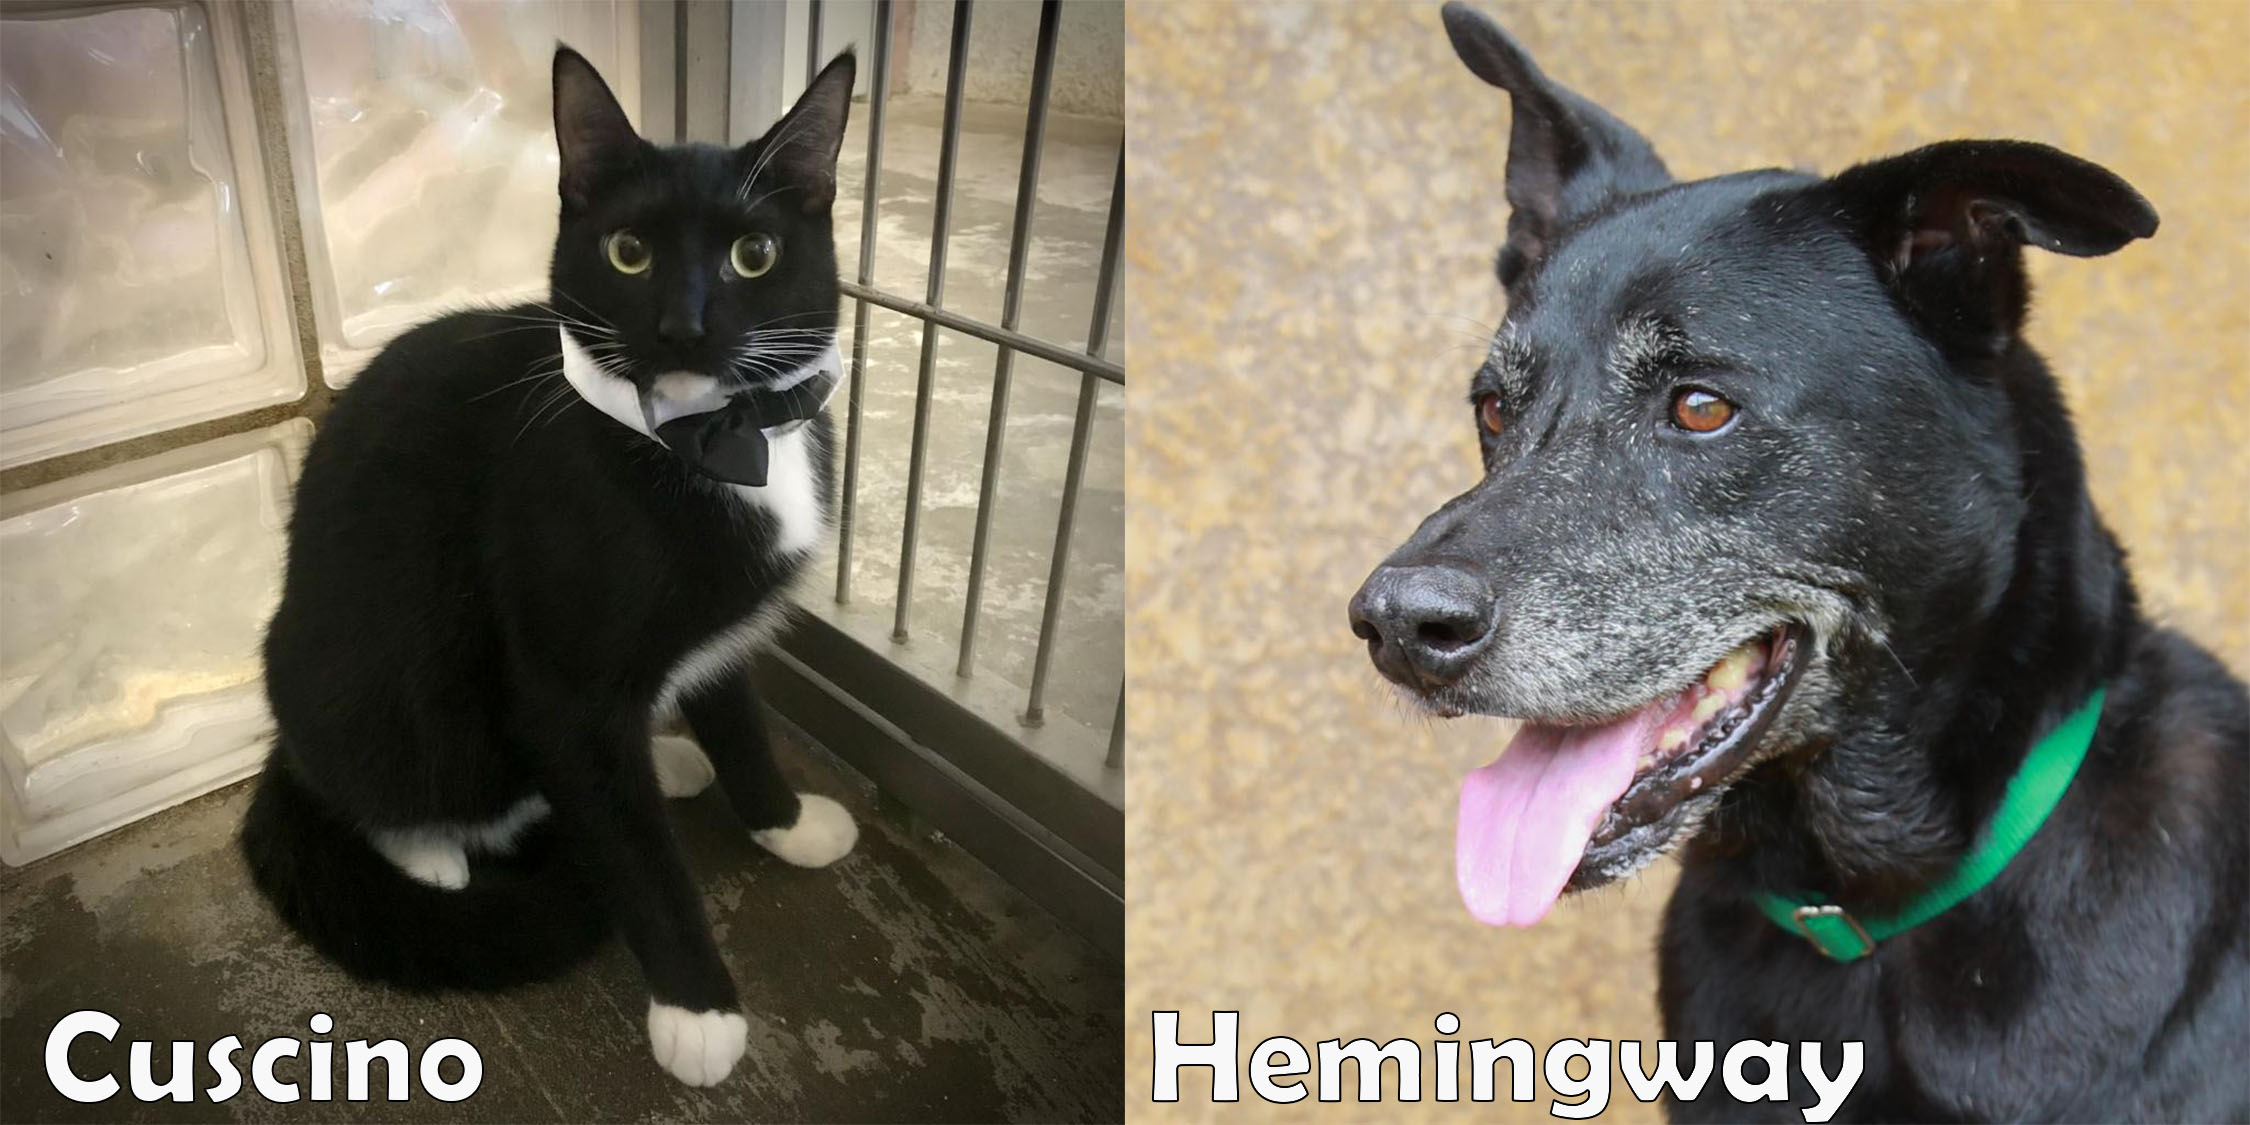 Cuscino and Hemingway are our two featured pets of the month.